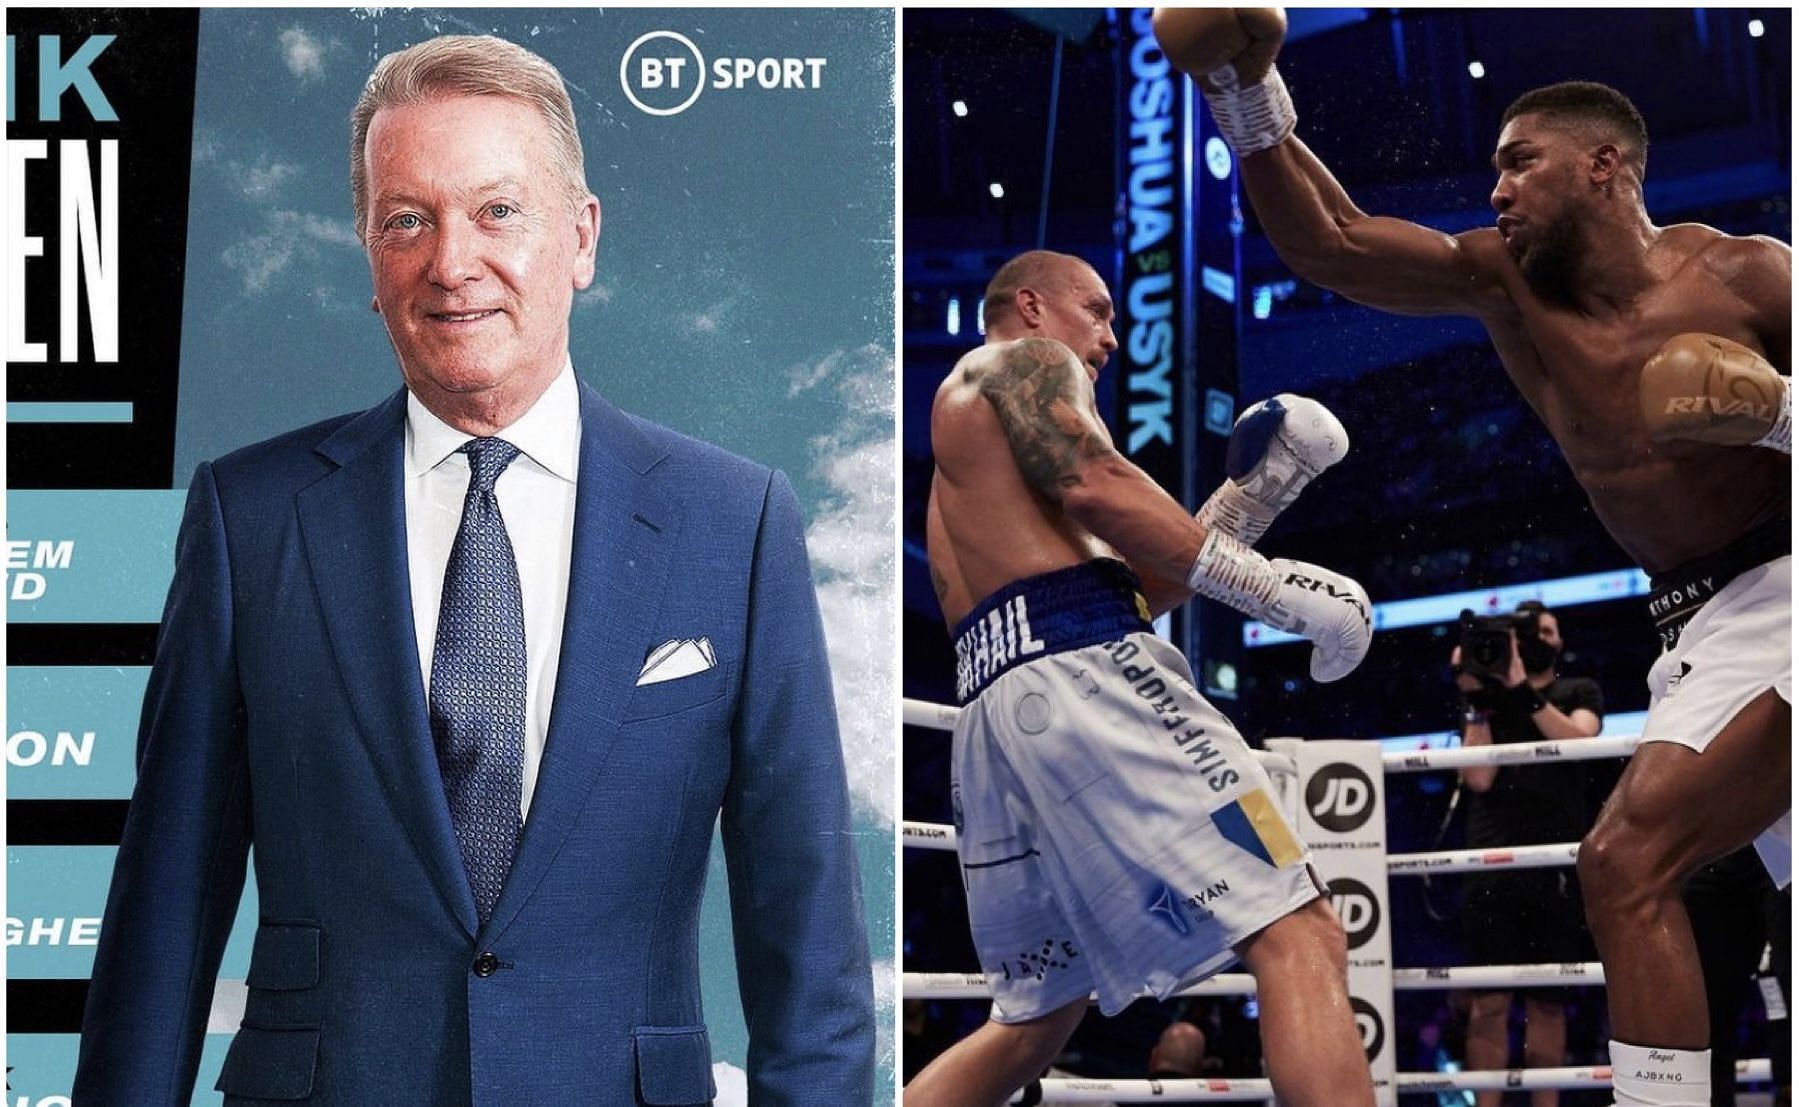 Frank Warren (left), Oleksandr Usyk (middle) and Anthony Joshua (right) - Images via @frank_warren_official and @usykaa